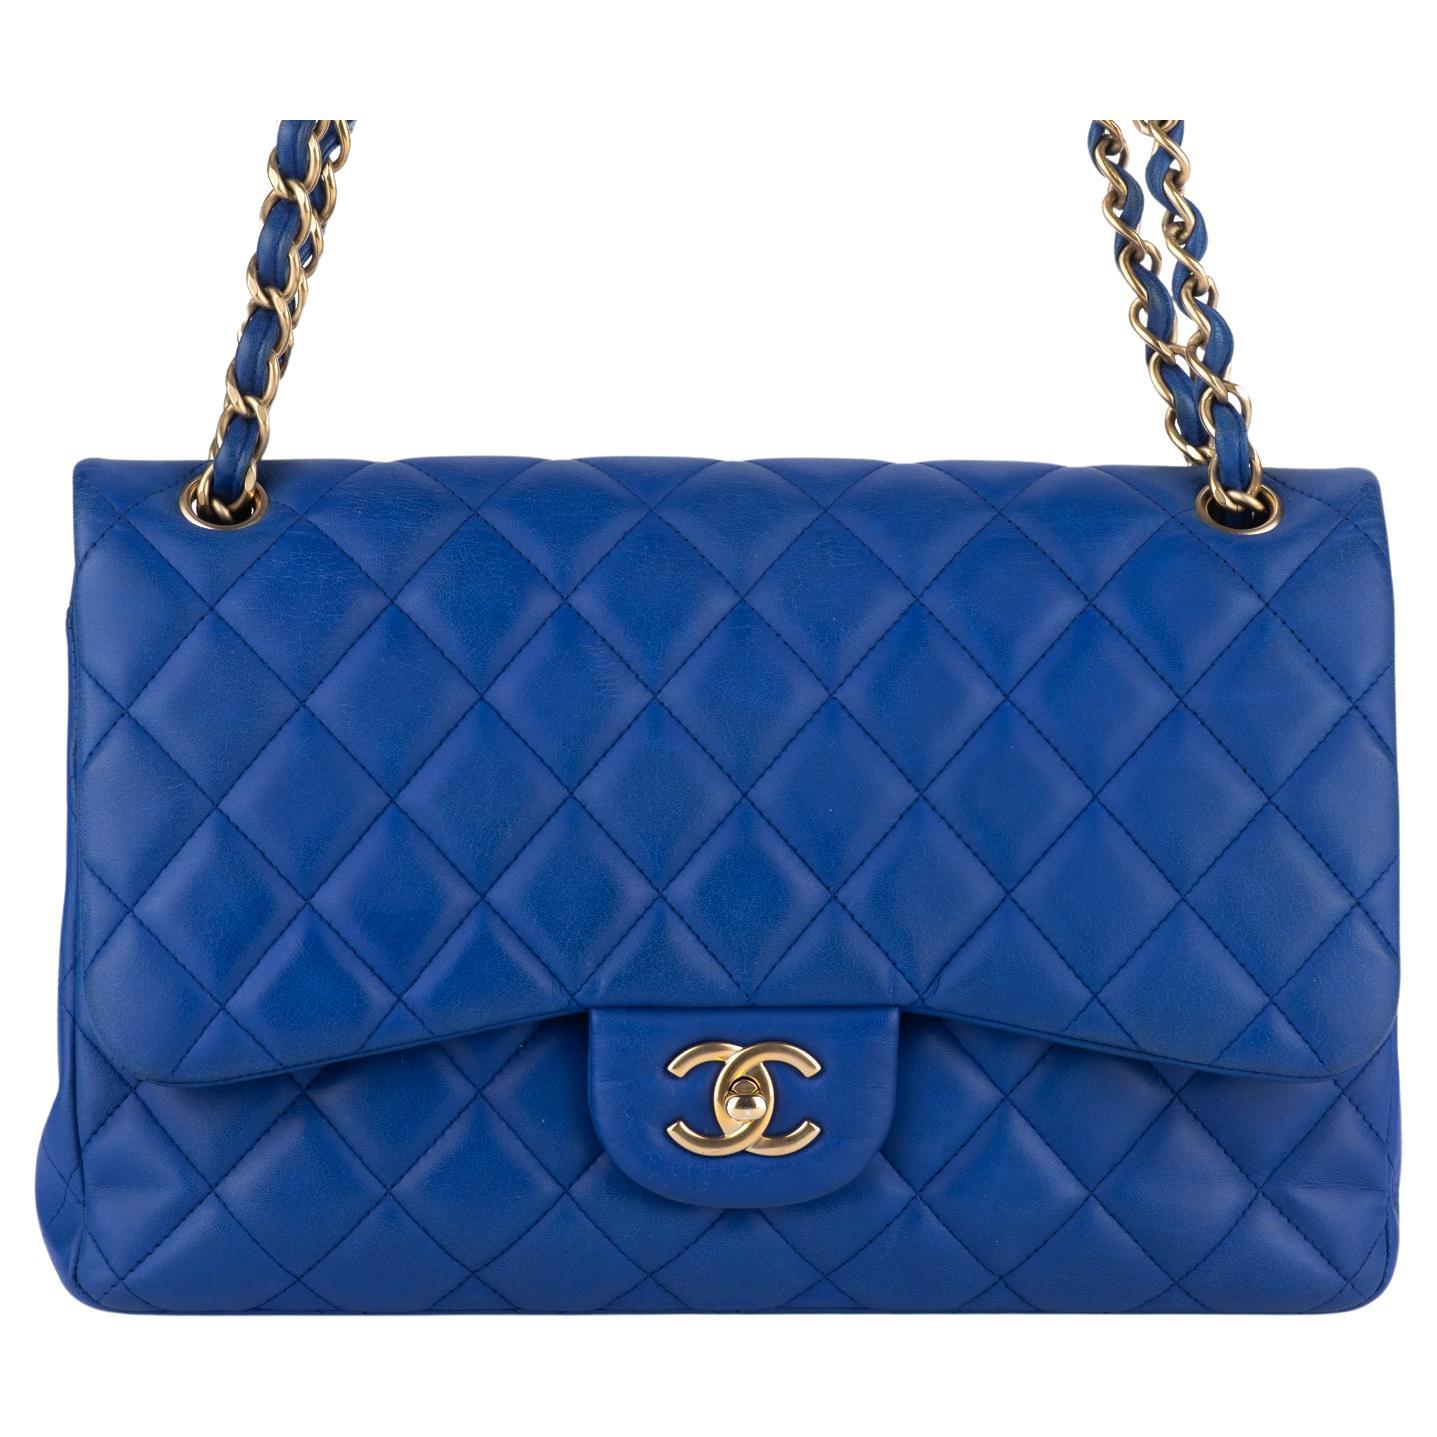 Chanel Flap bag in the classic quilted pattern. The bag has a double chain-leather woven strap with a CC twist gold lock flap closure. The single flap opens up to a leather lined interior with a single back pocket.
Store retail price $11,700.